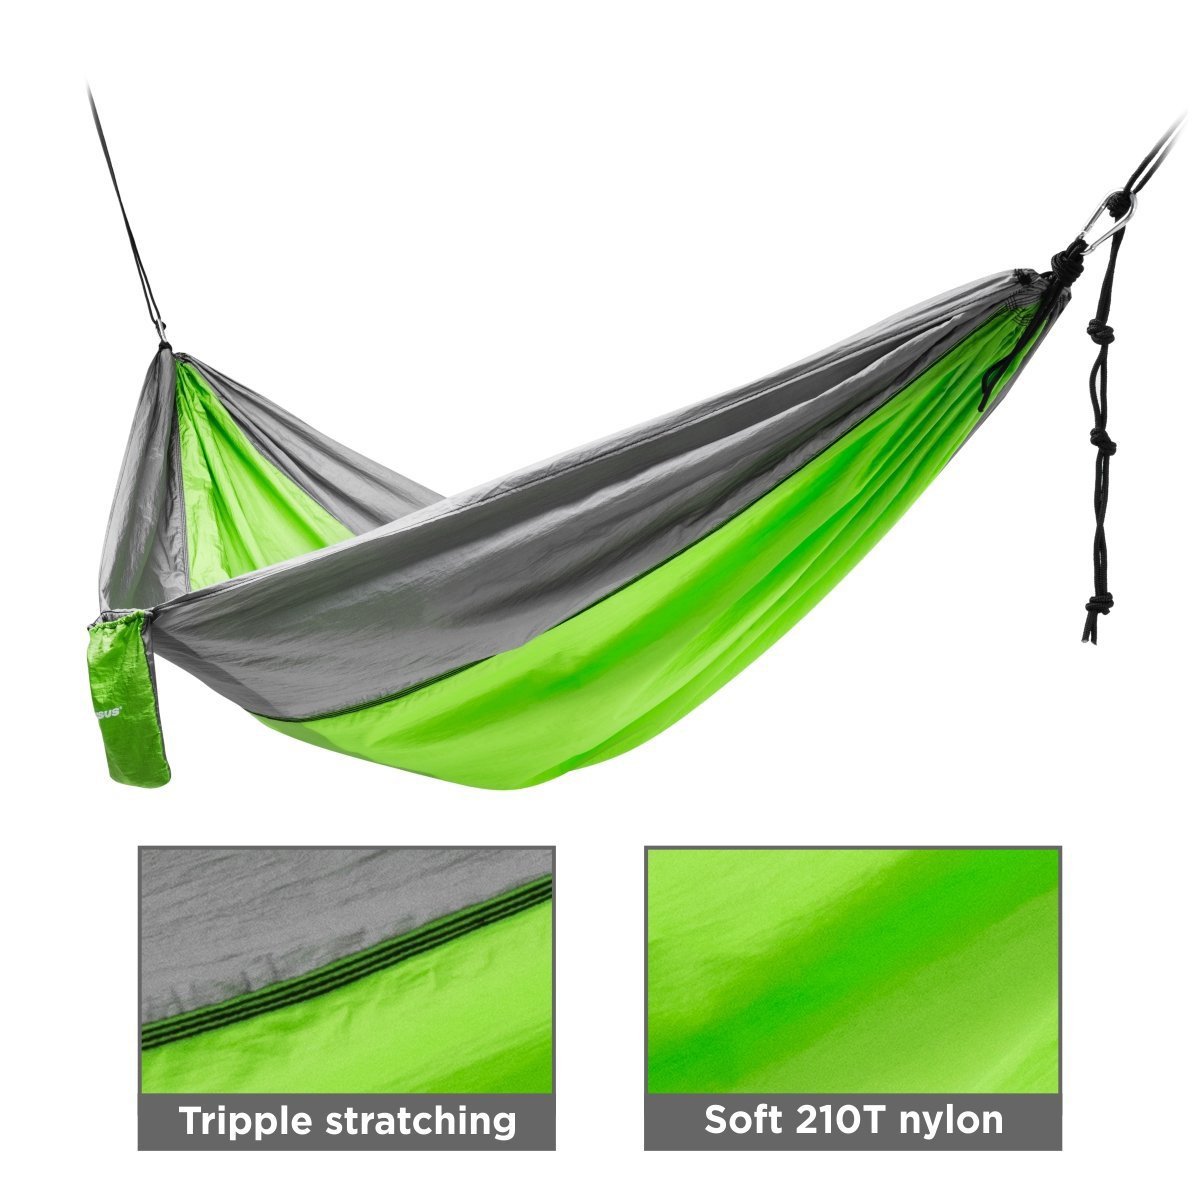 Nisus green camping hammock with a carry nylon fabric, tripple stratching